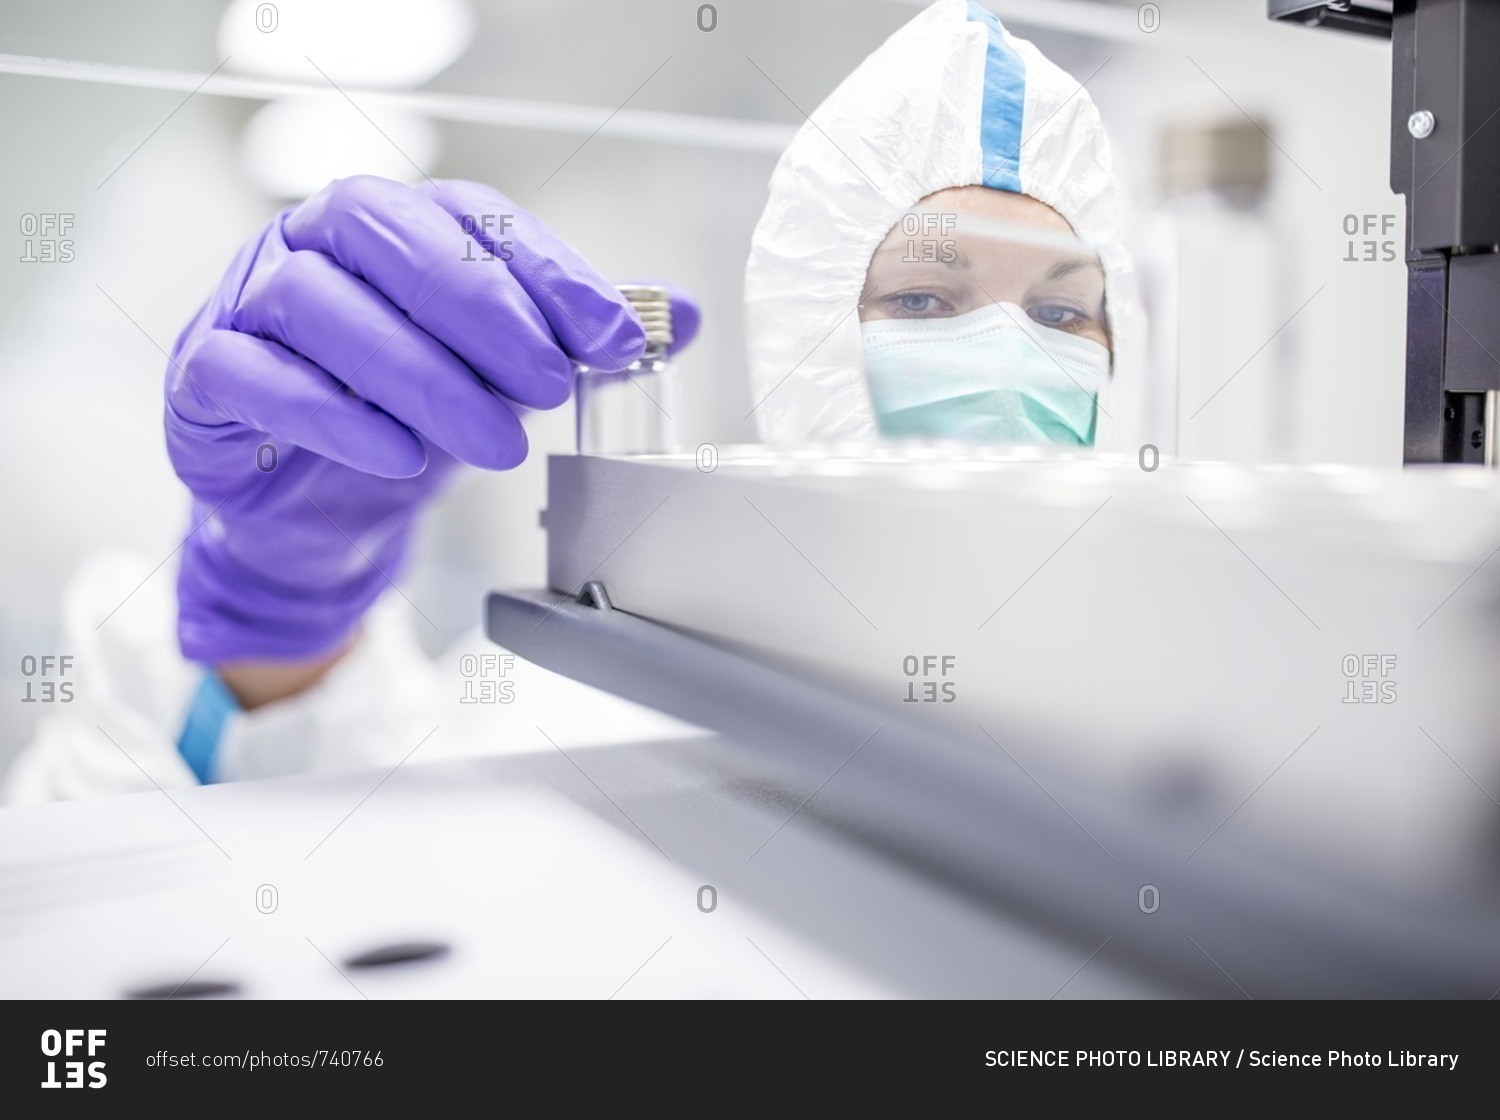 Technician checking stem cell cultures in a laboratory that manufactures human tissues for implants. Such implants include bone and skin grafts.